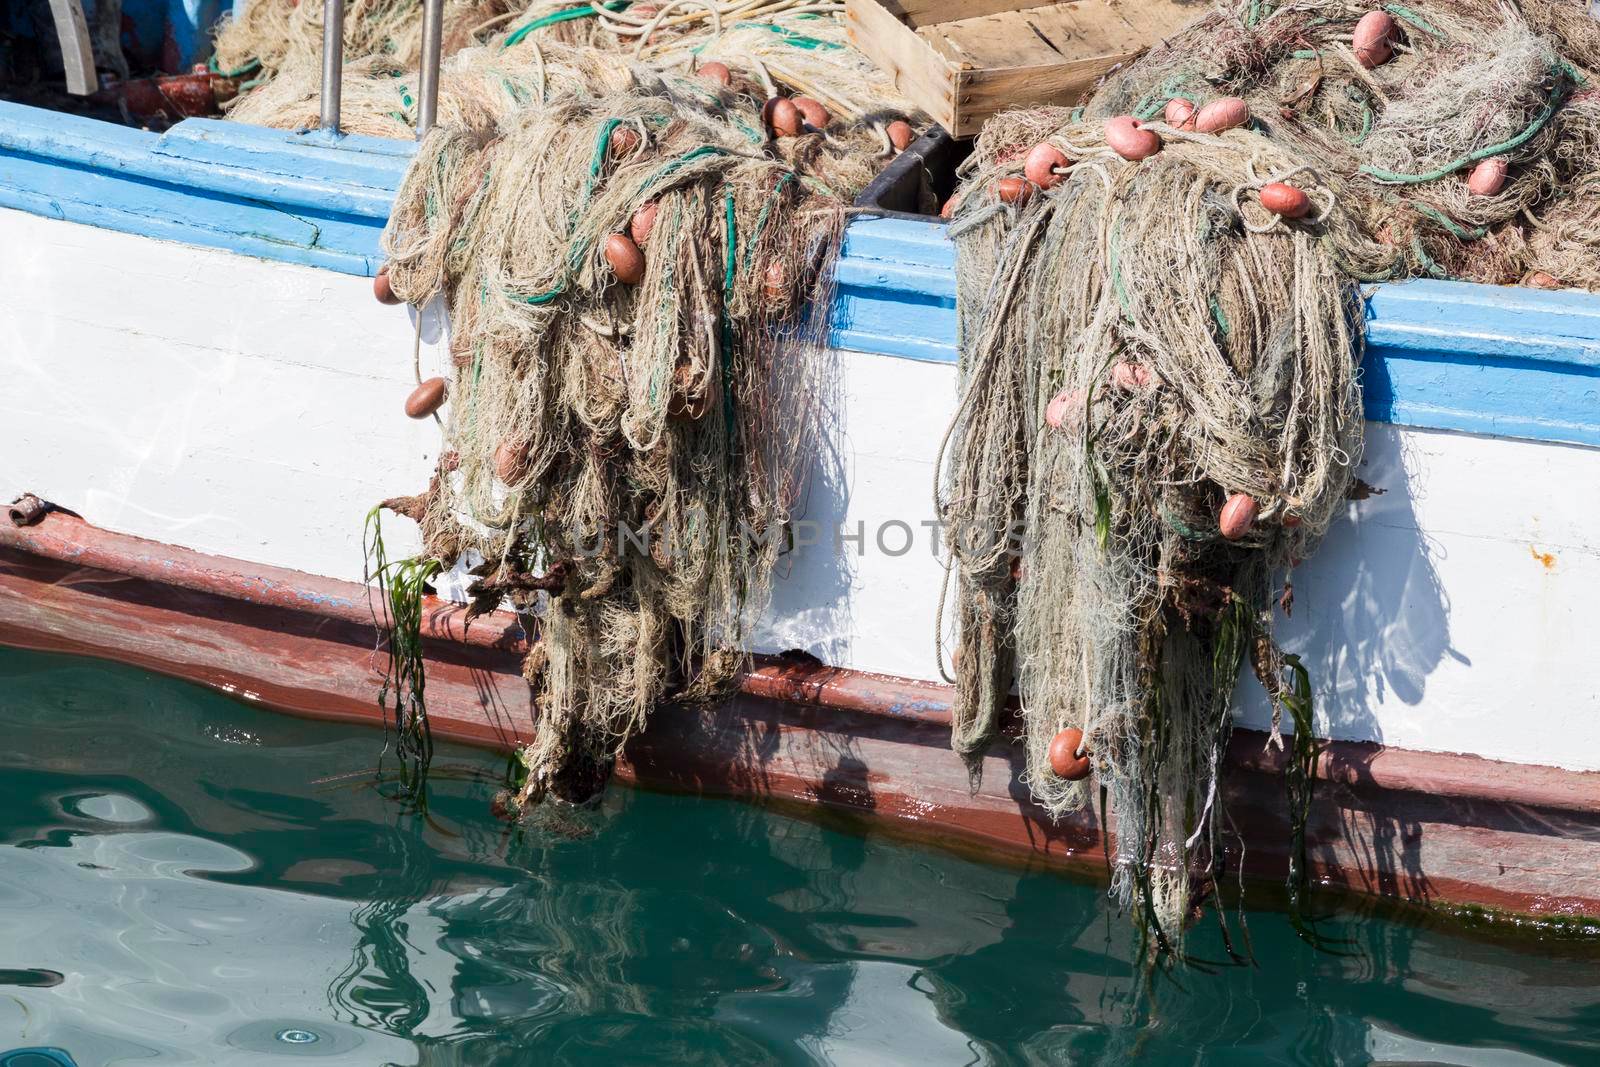 A fishing vessel with nets ready to fish.